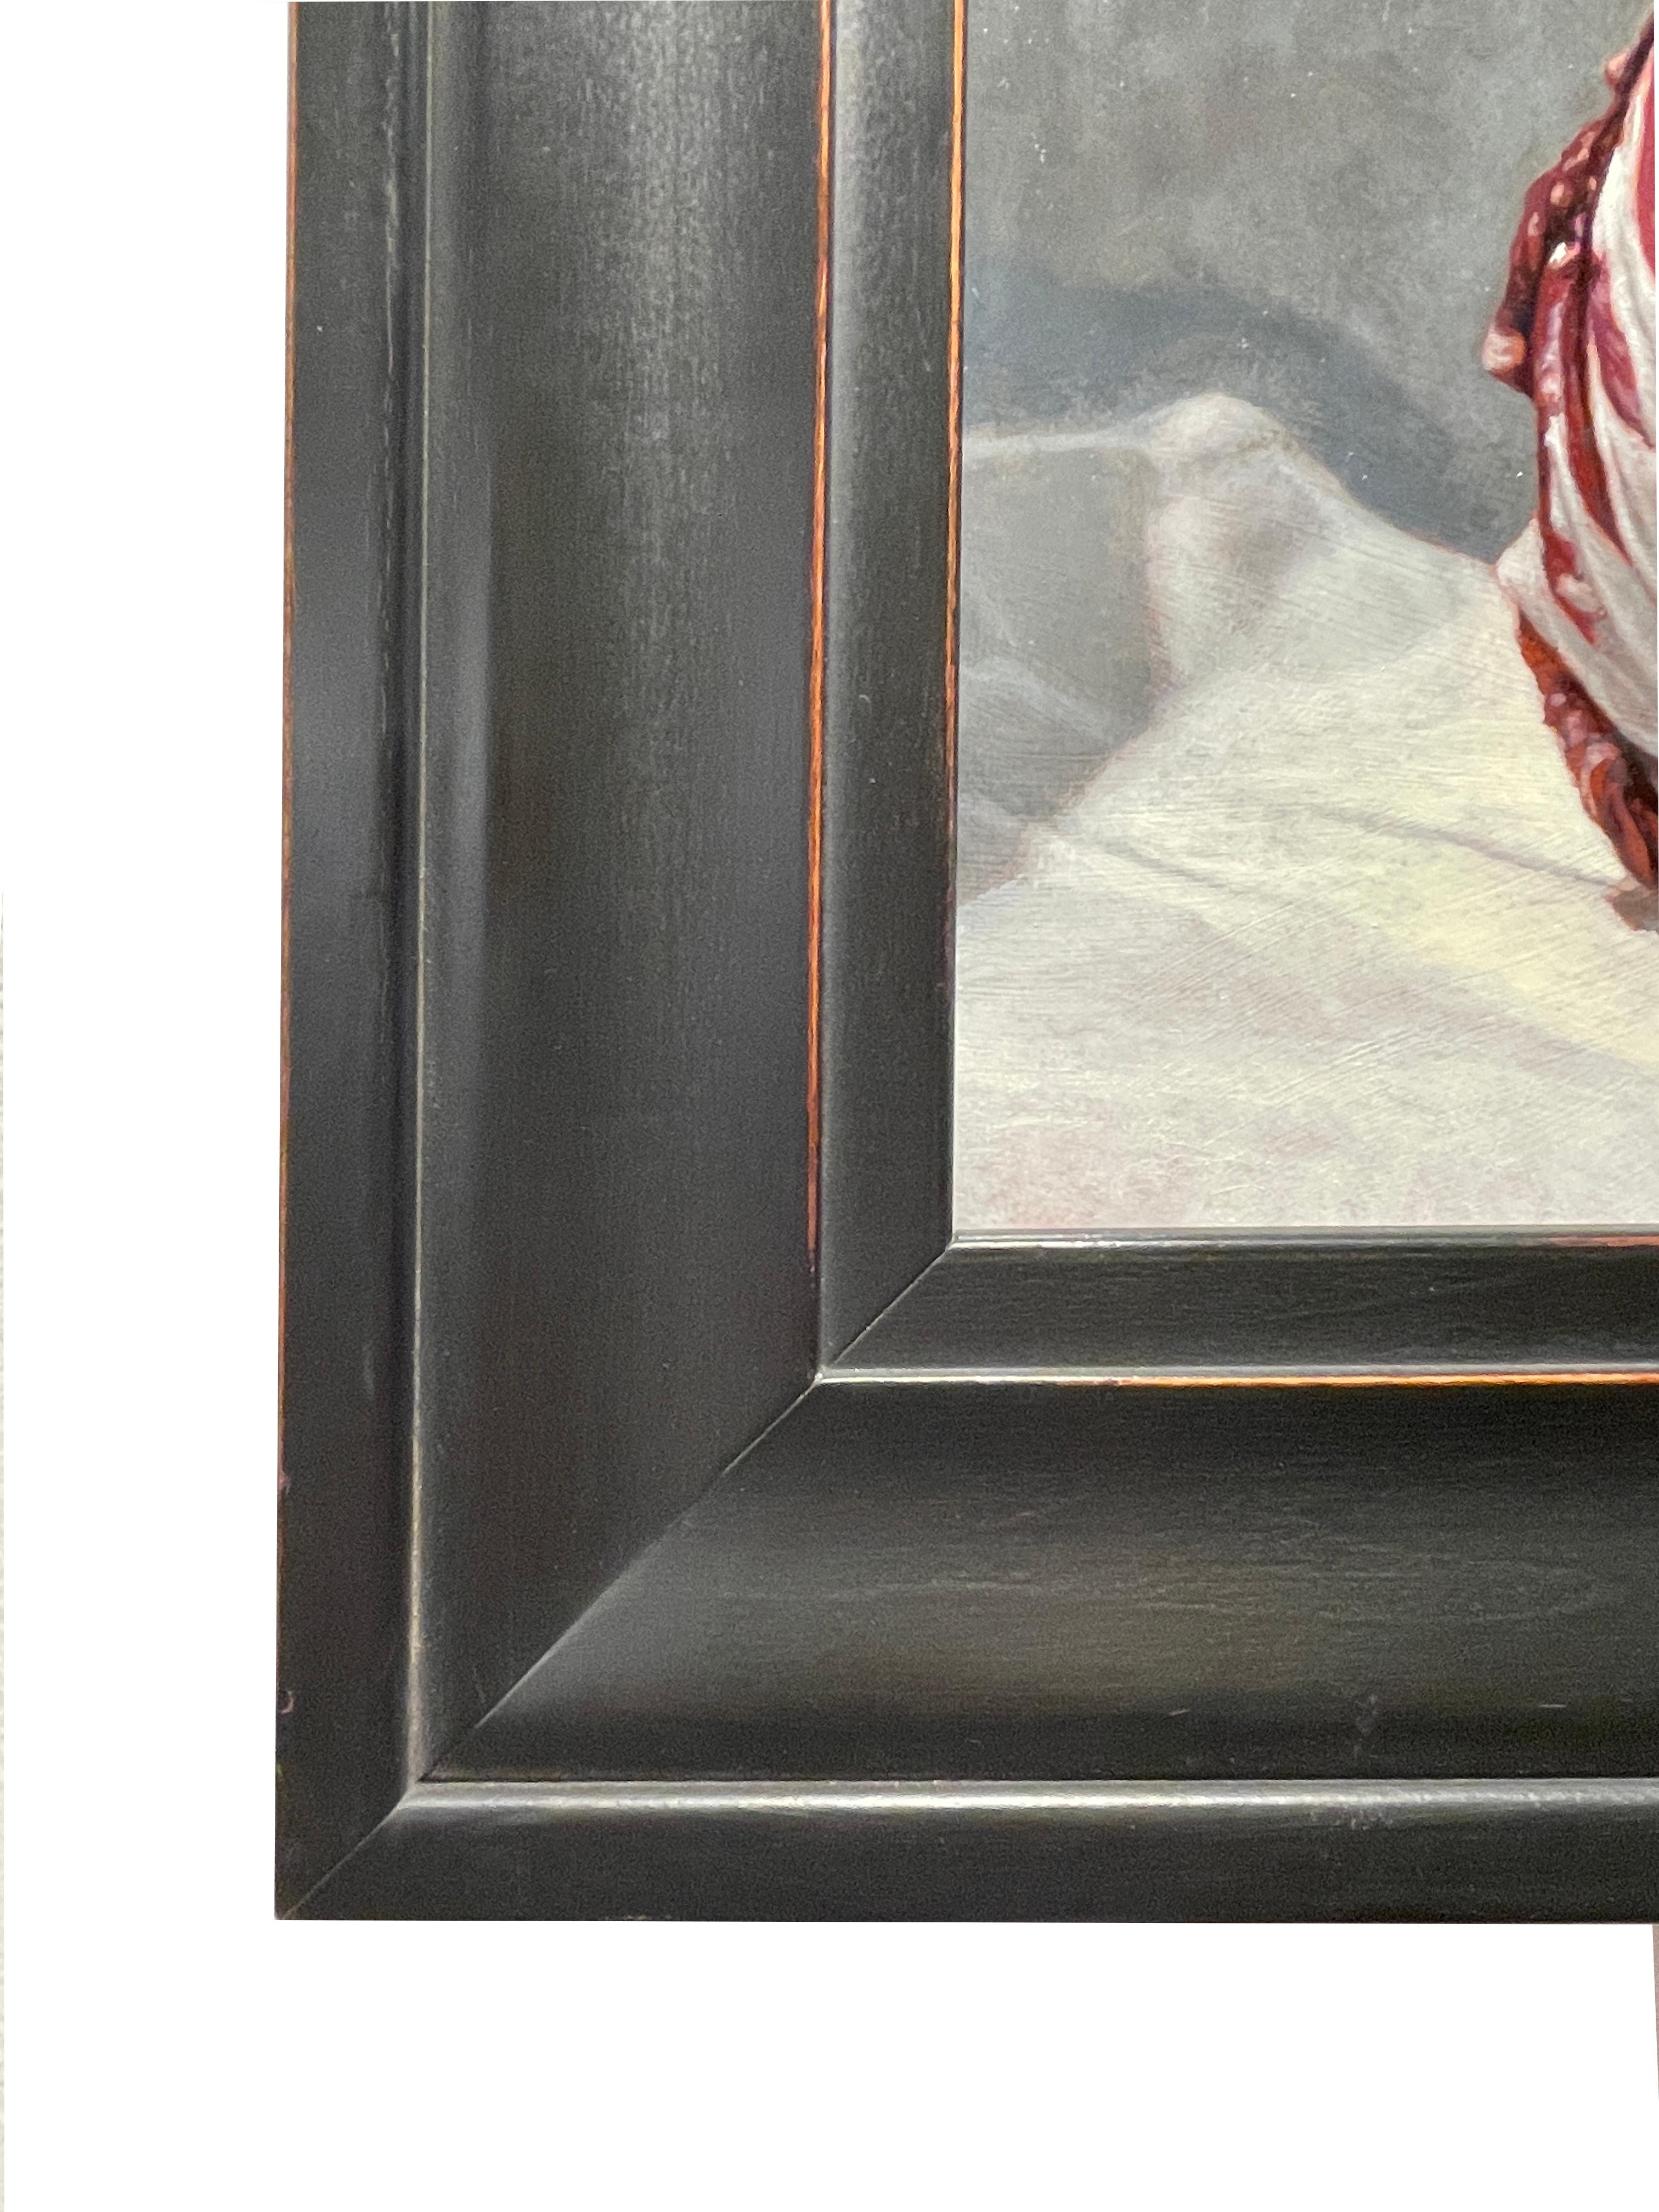 A simple head of radicchio sits upon a piece of satin cloth yet its complexity draws us in to examine the exquisite detail, the softness of the fabric, the surface of the lettuce.  This still life is enhanced by the hand made wooden frame measuring